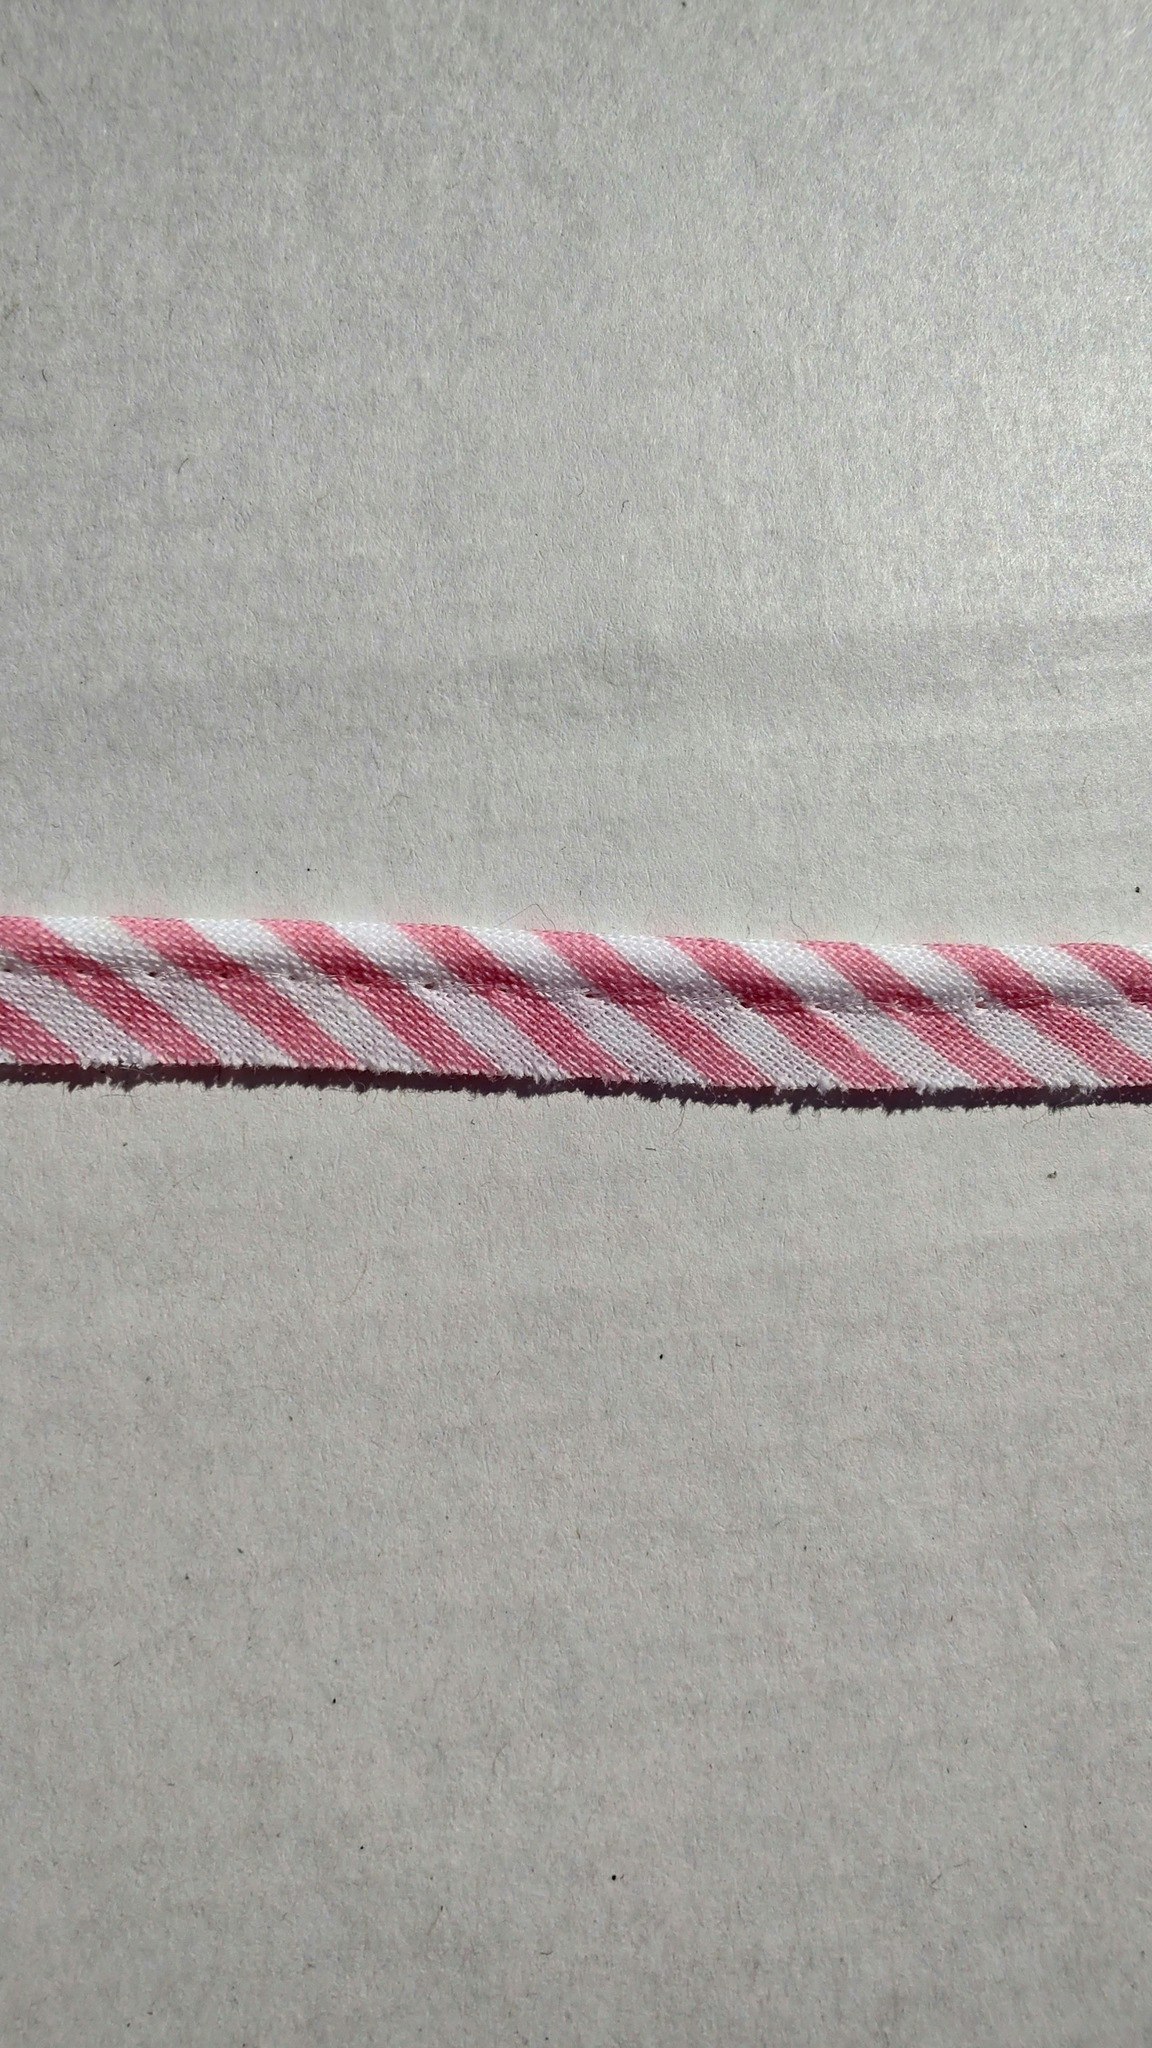 Patterned piping